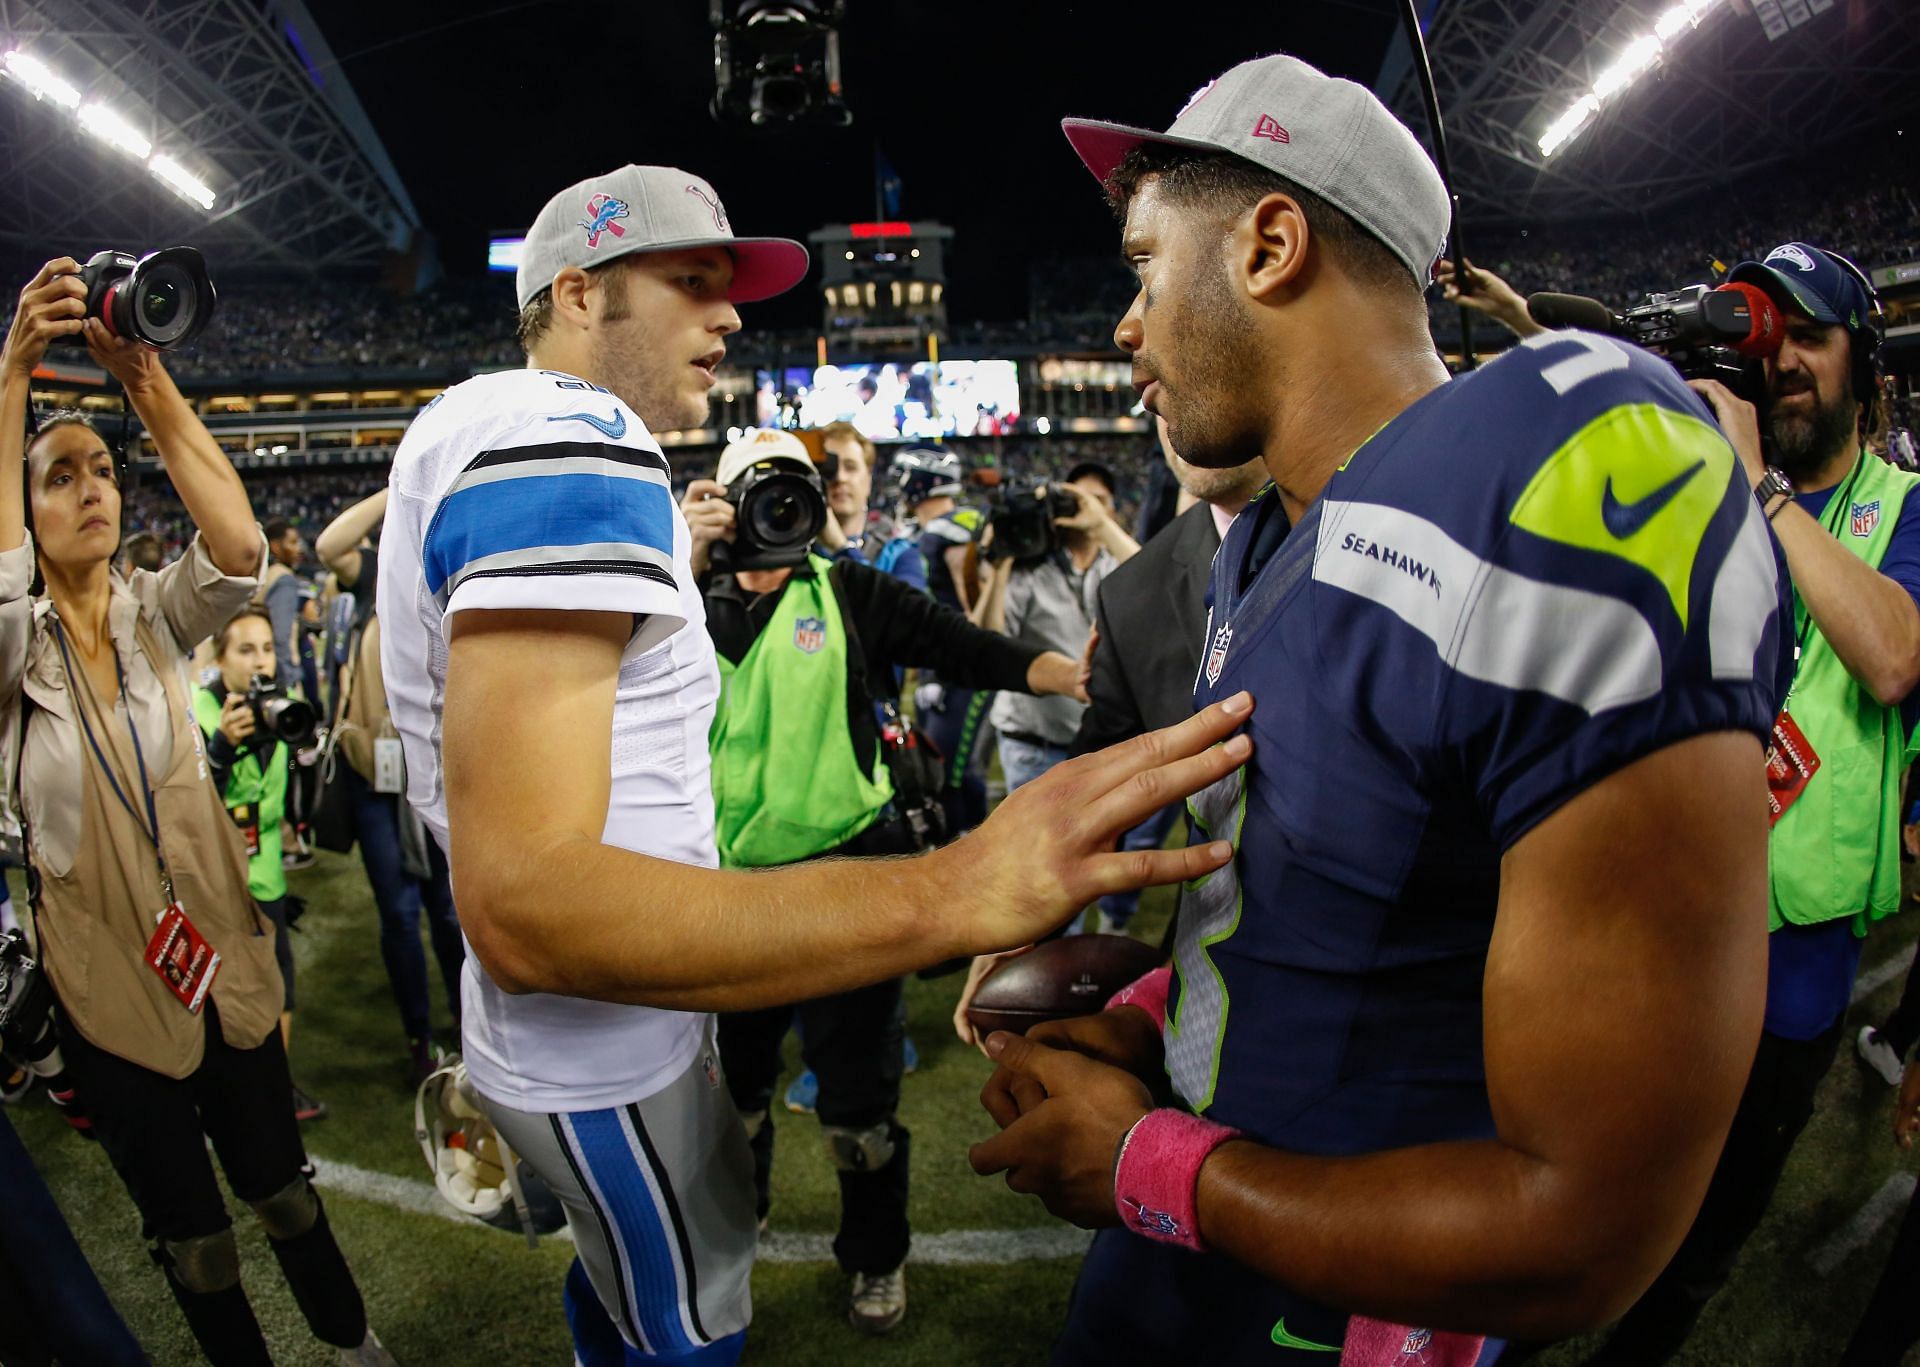 Stafford with the Detroit Lions and Russell Wilson with the Seattle Seahawks